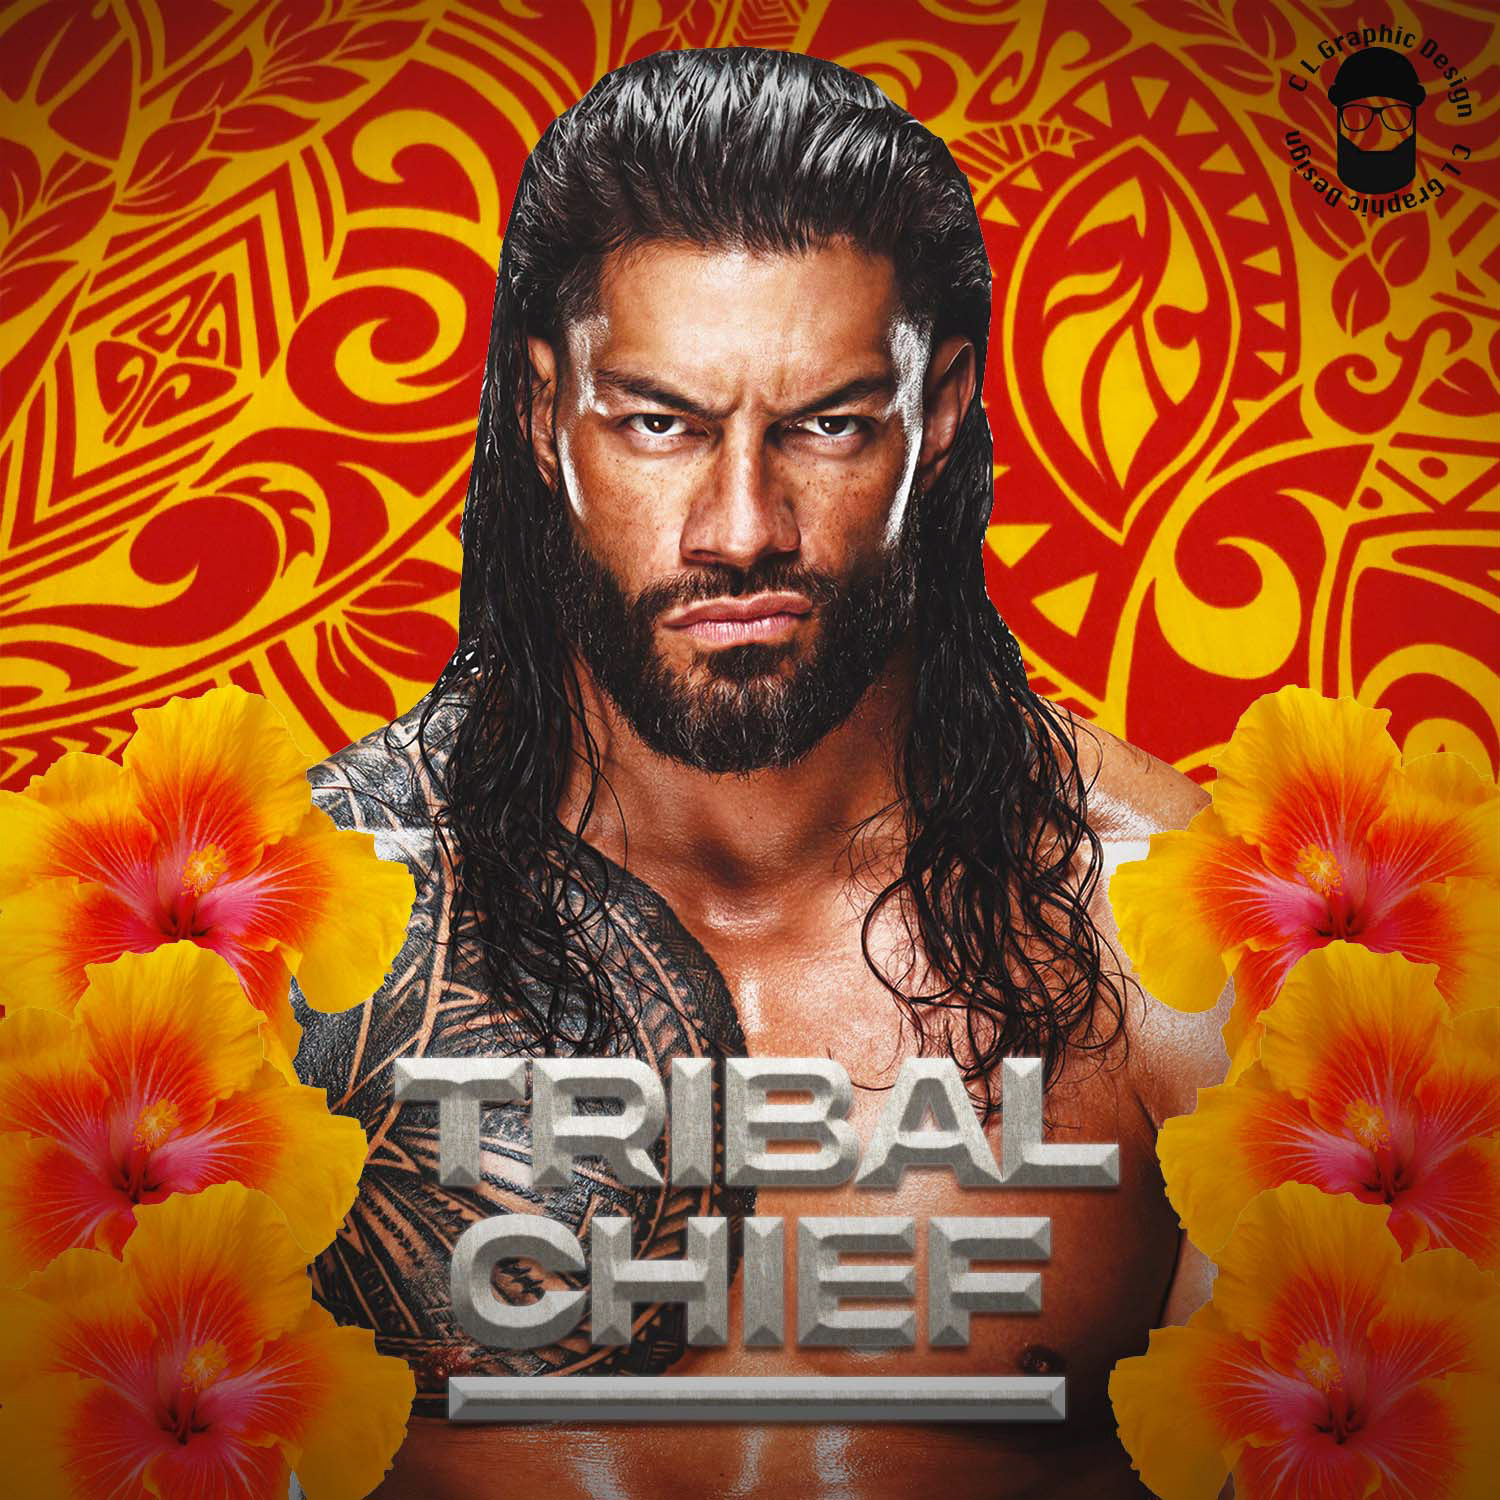 Roman Reigns The Tribal Chief Wallpapers